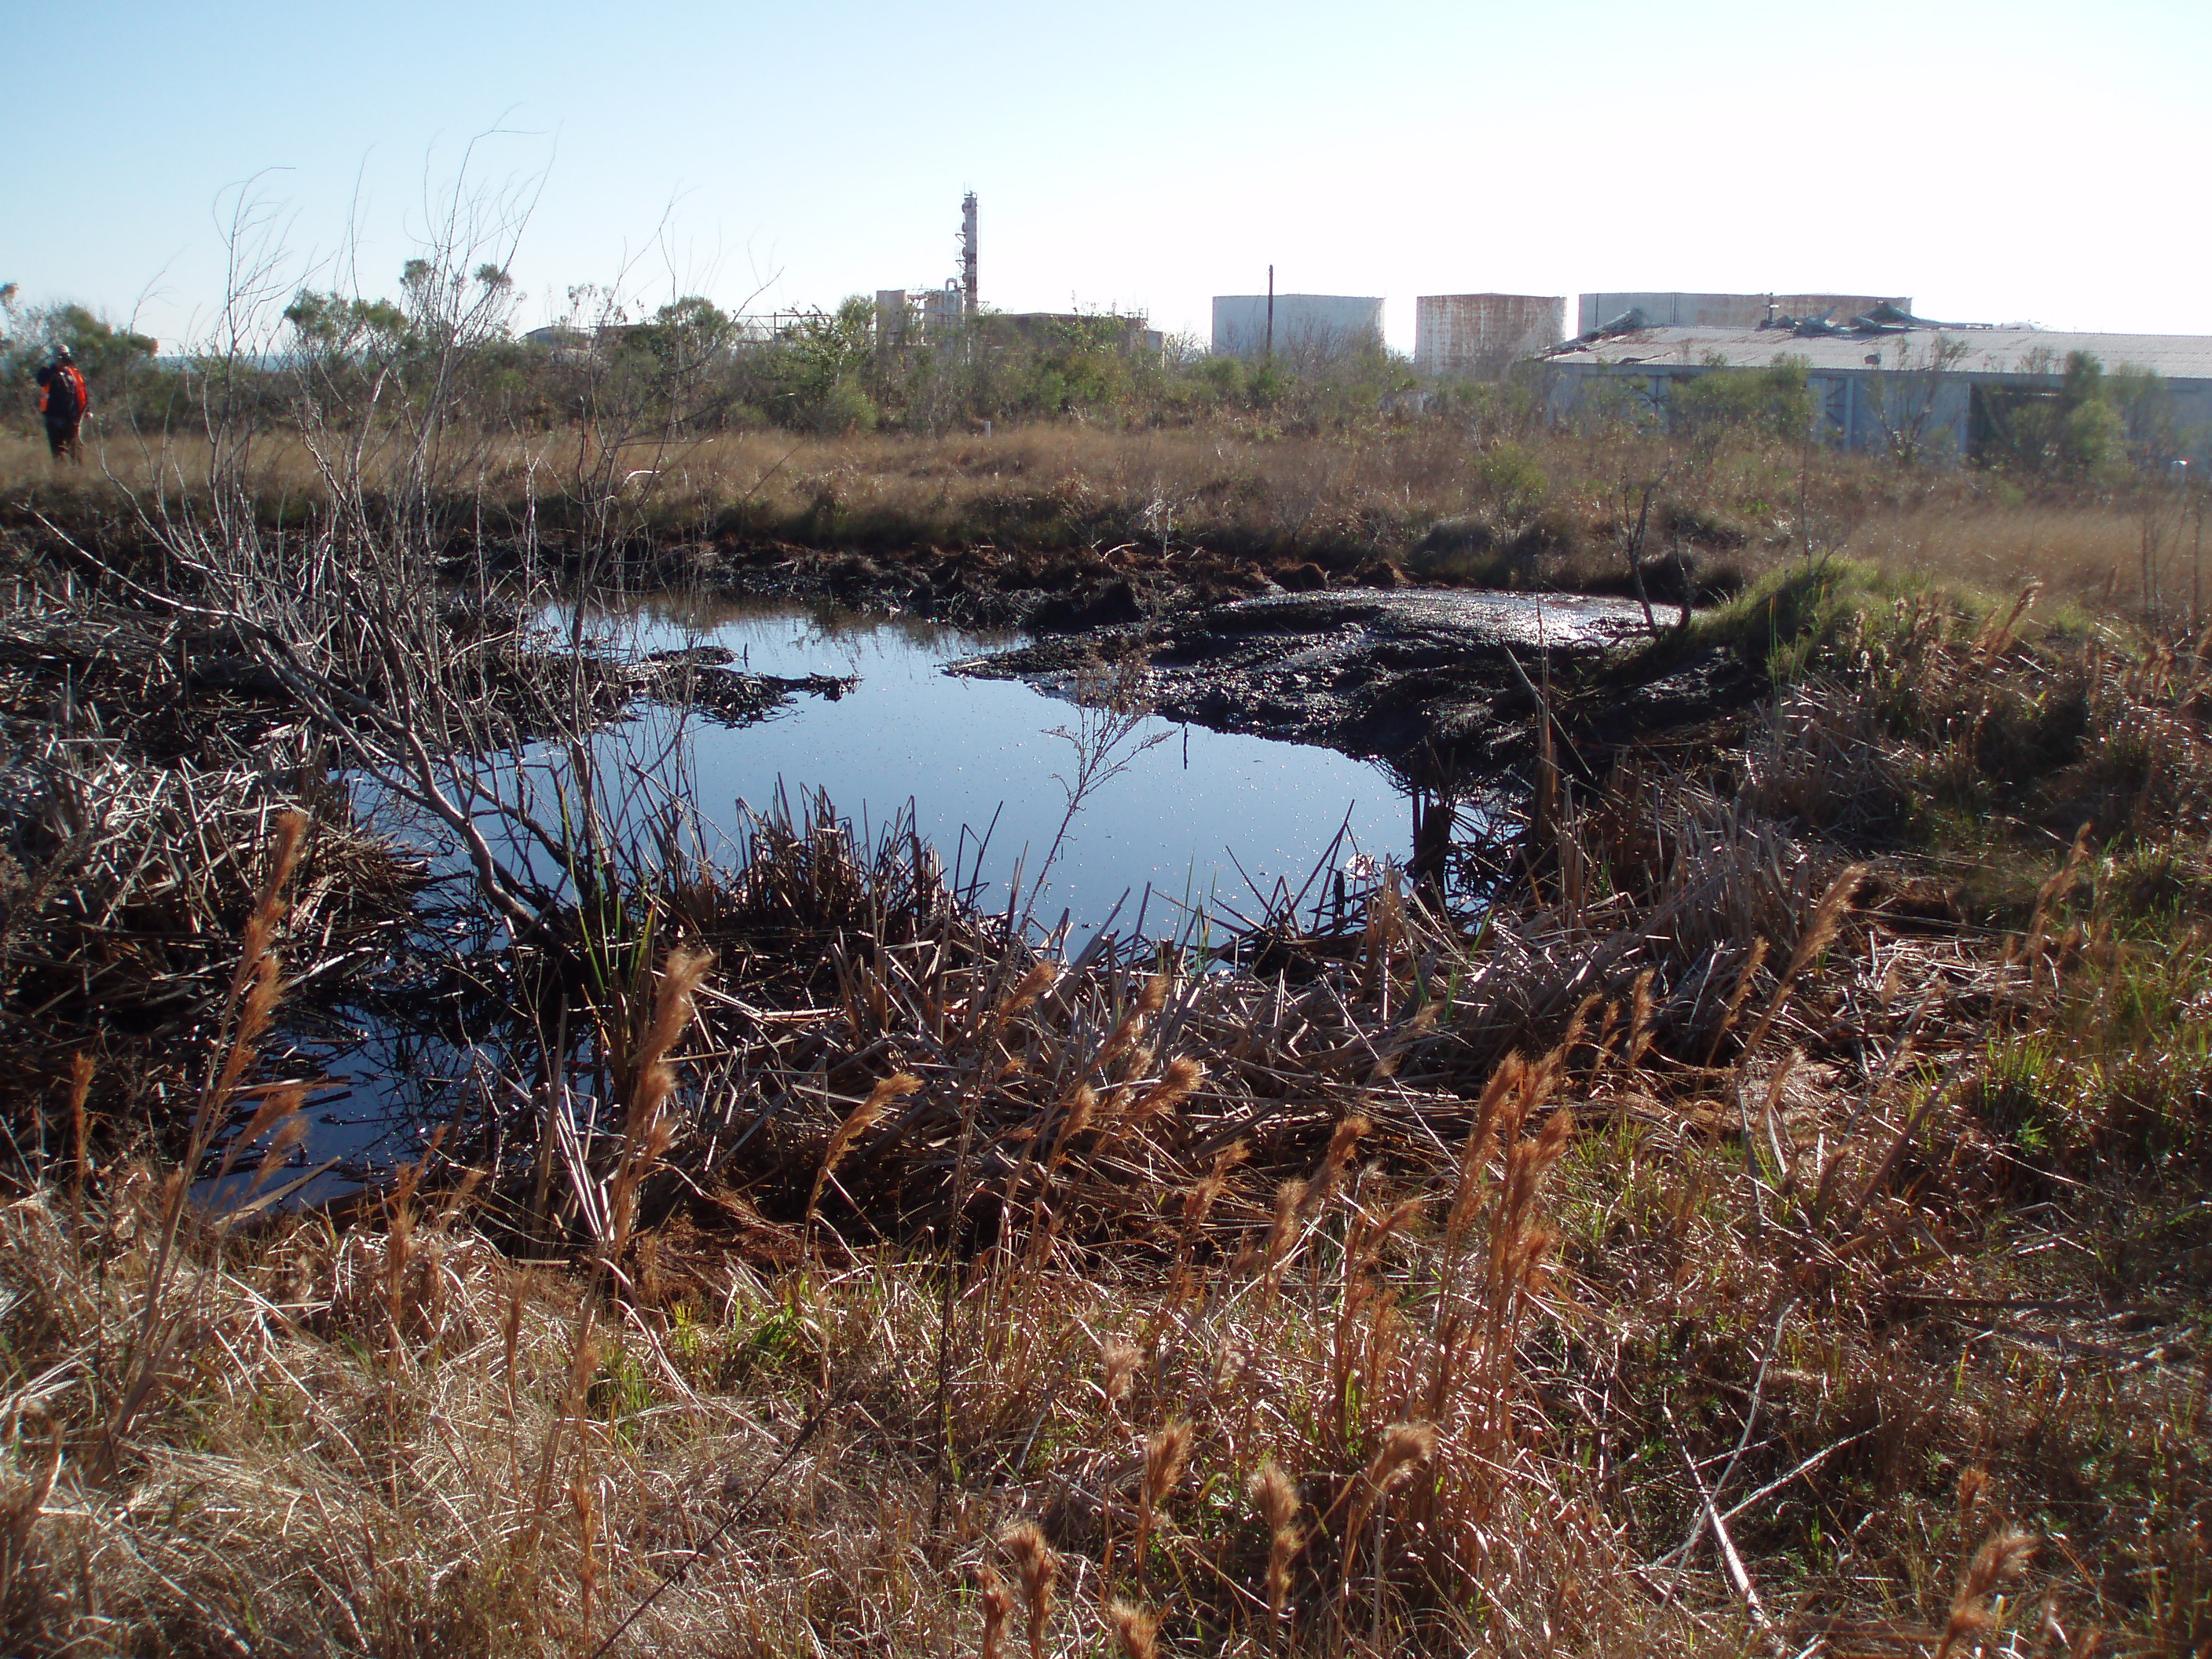 Oil pits dominated the Malone site prior to the cleanup.